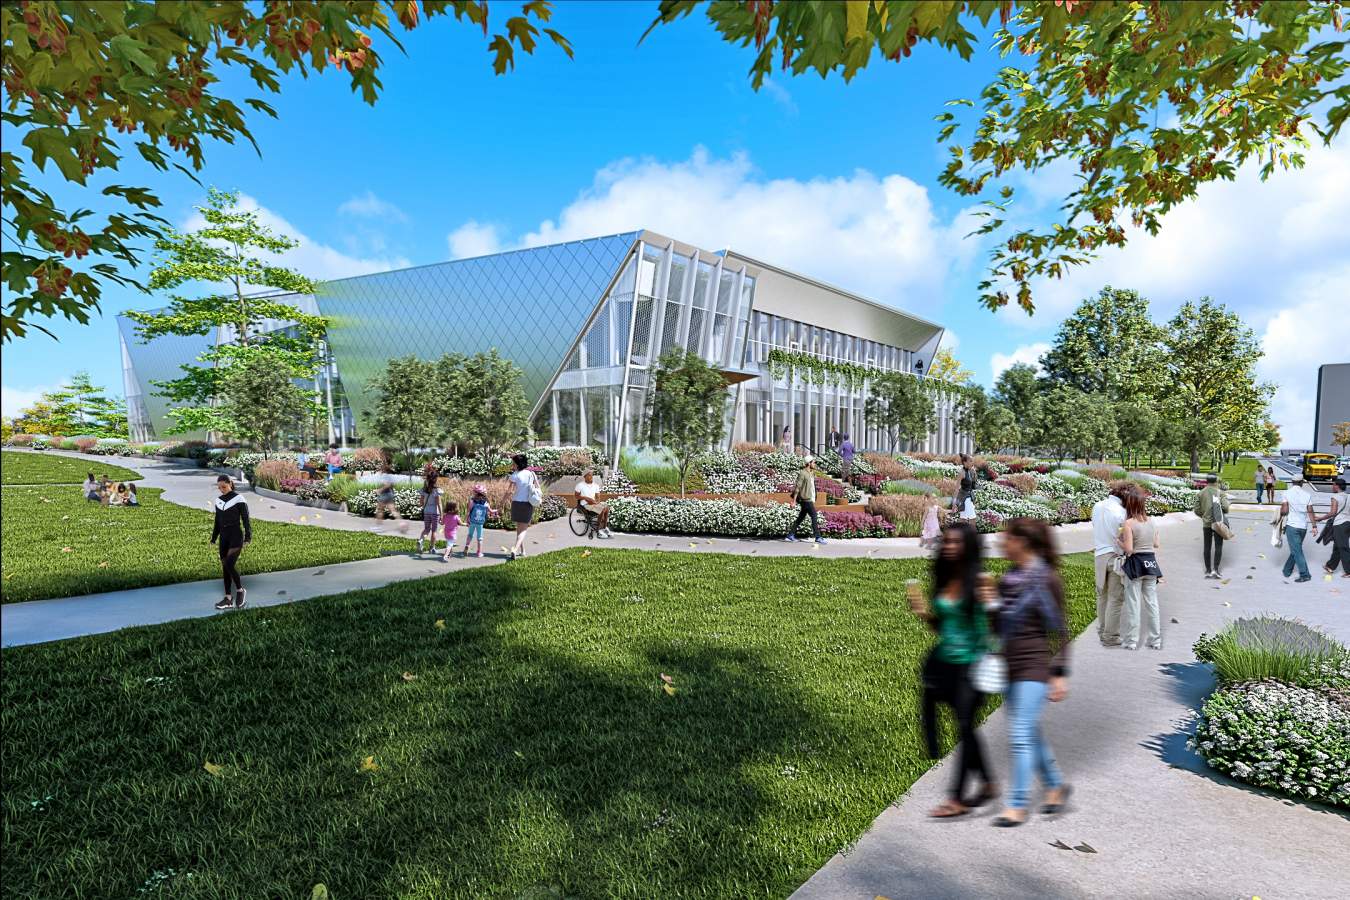 Multipurpose sports facility will be first completed space at Obama Presidential Center